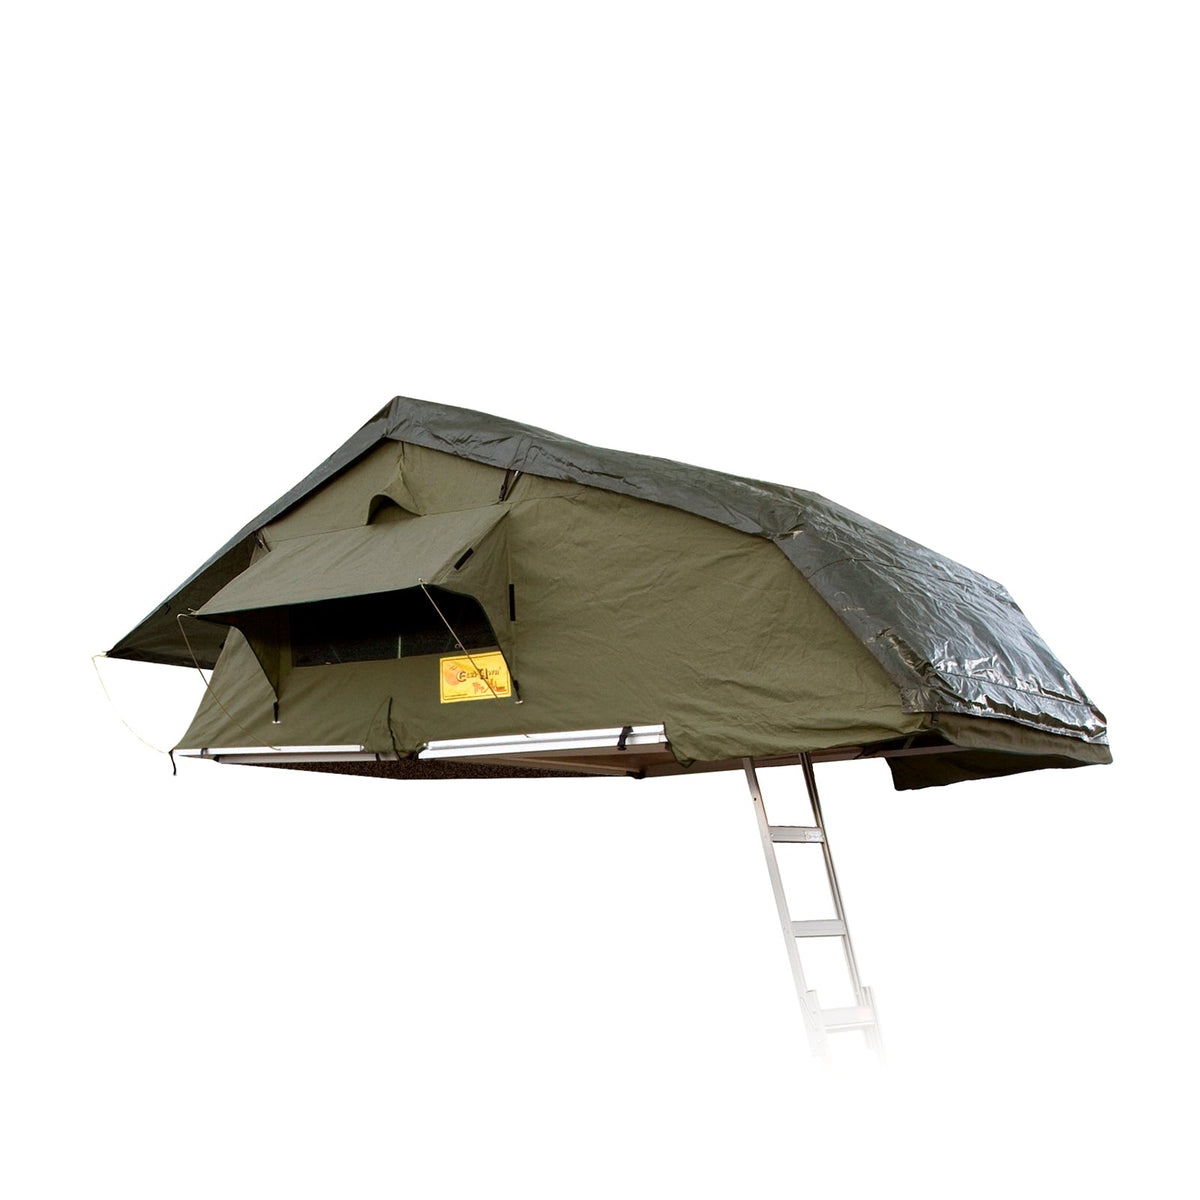 XKLUSIV Roof Top Tent  Roof Top Tent Eezi-Awn- Overland Kitted